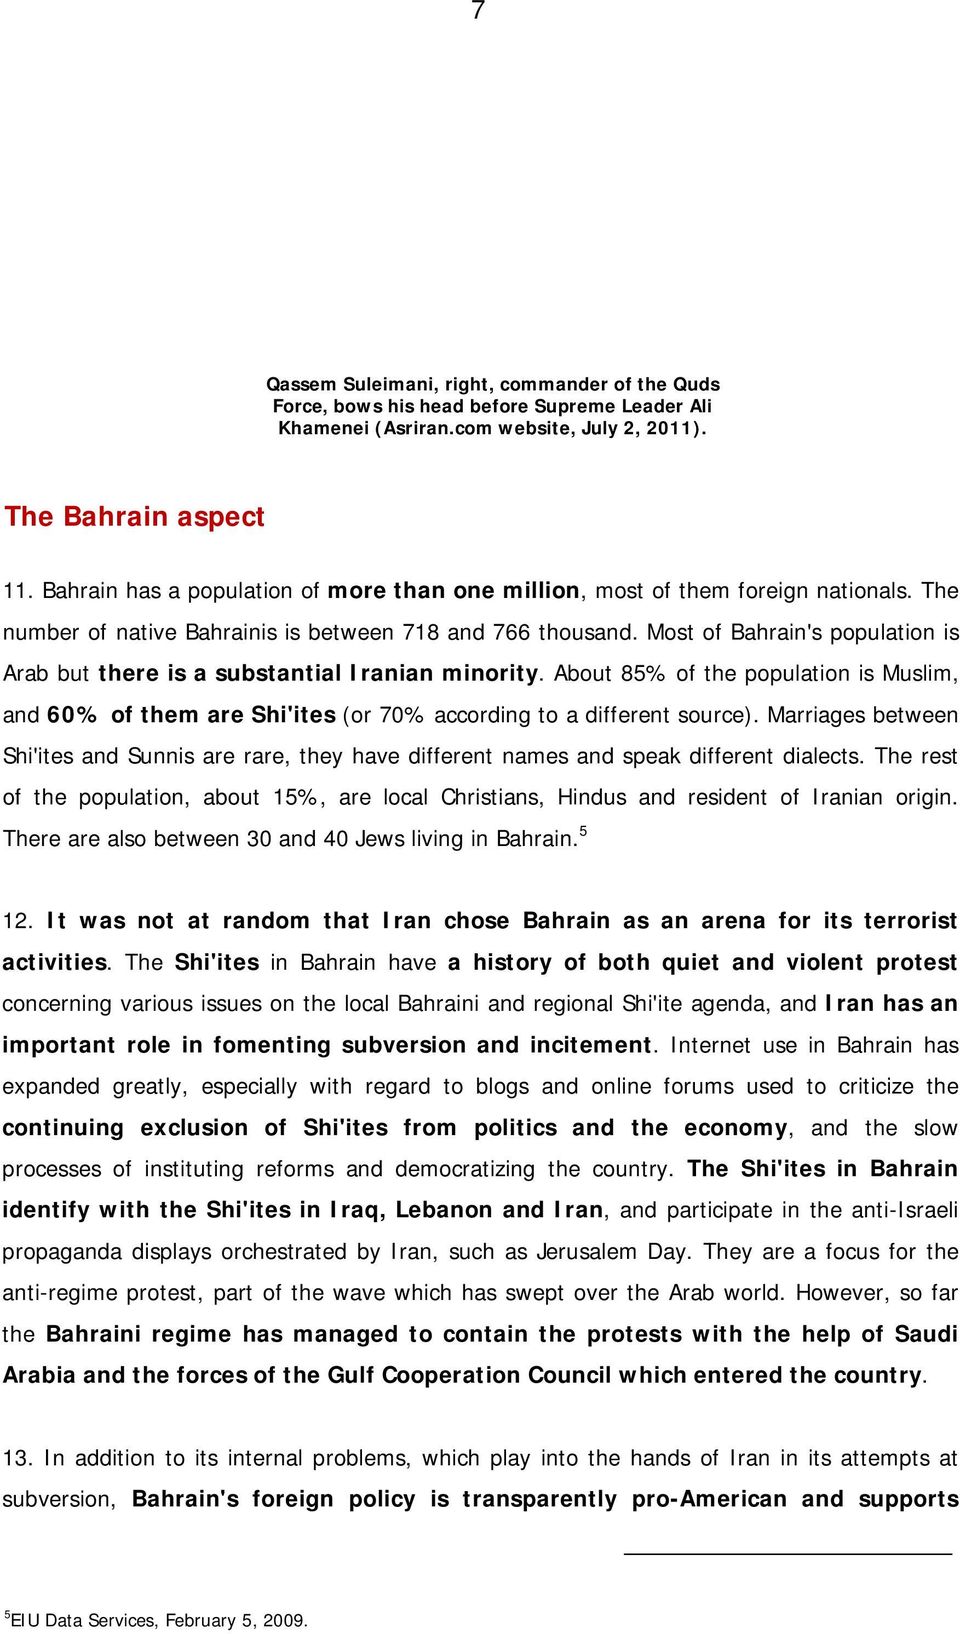 Most of Bahrain's population is Arab but there is a substantial Iranian minority. About 85% of the population is Muslim, and 60% of them are Shi'ites (or 70% according to a different source).